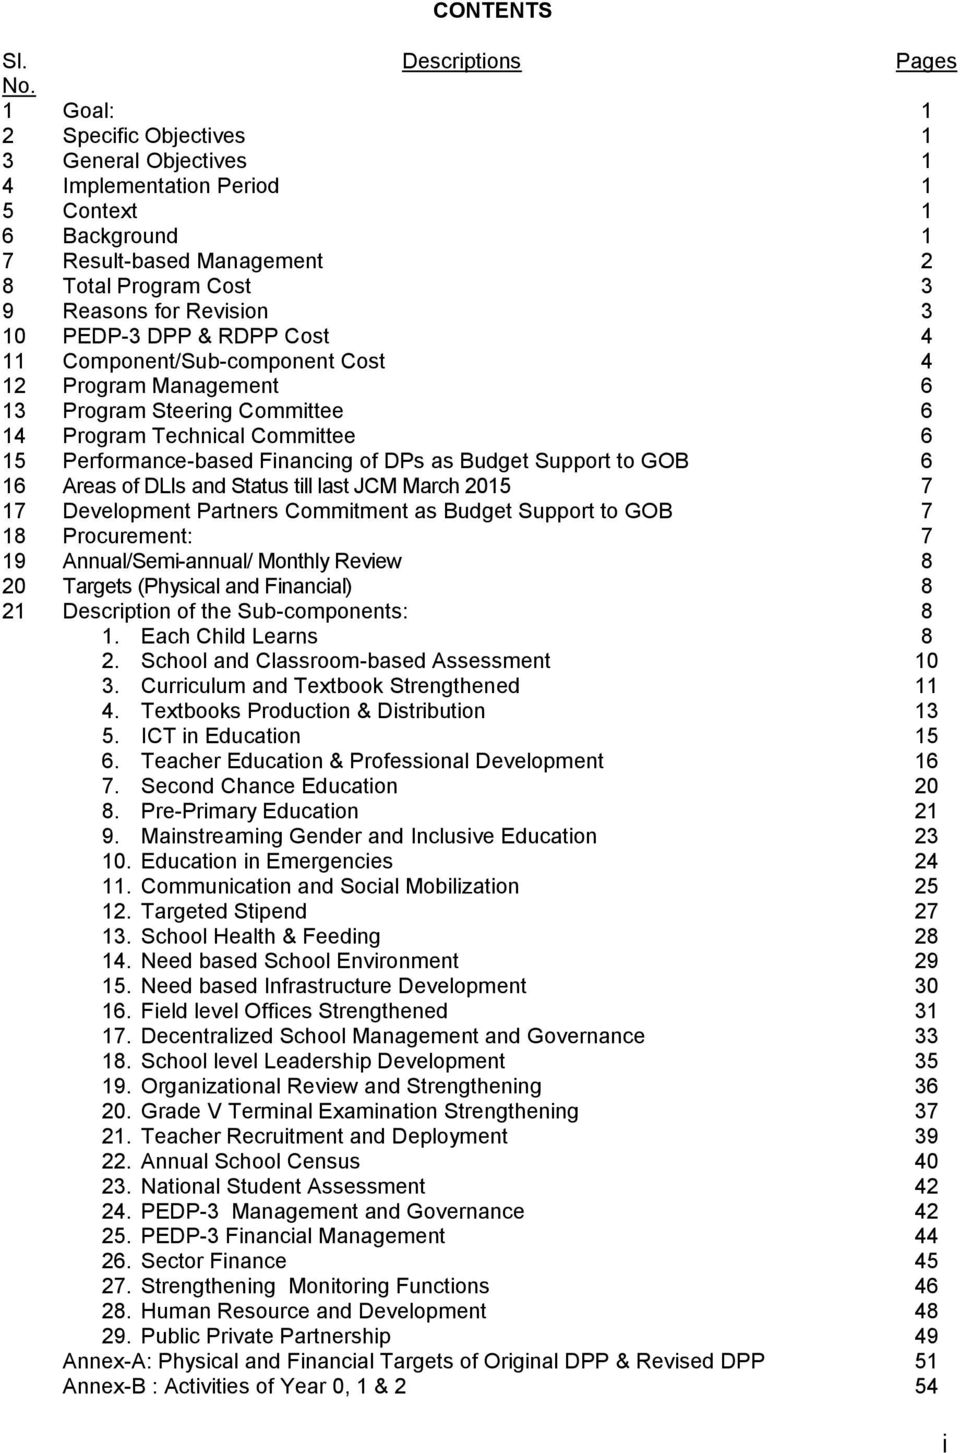 & RDPP Cost 4 11 Component/Sub-component Cost 4 12 Program Management 6 13 Program Steering Committee 6 14 Program Technical Committee 6 15 Performance-based Financing of DPs as Budget Support to GOB